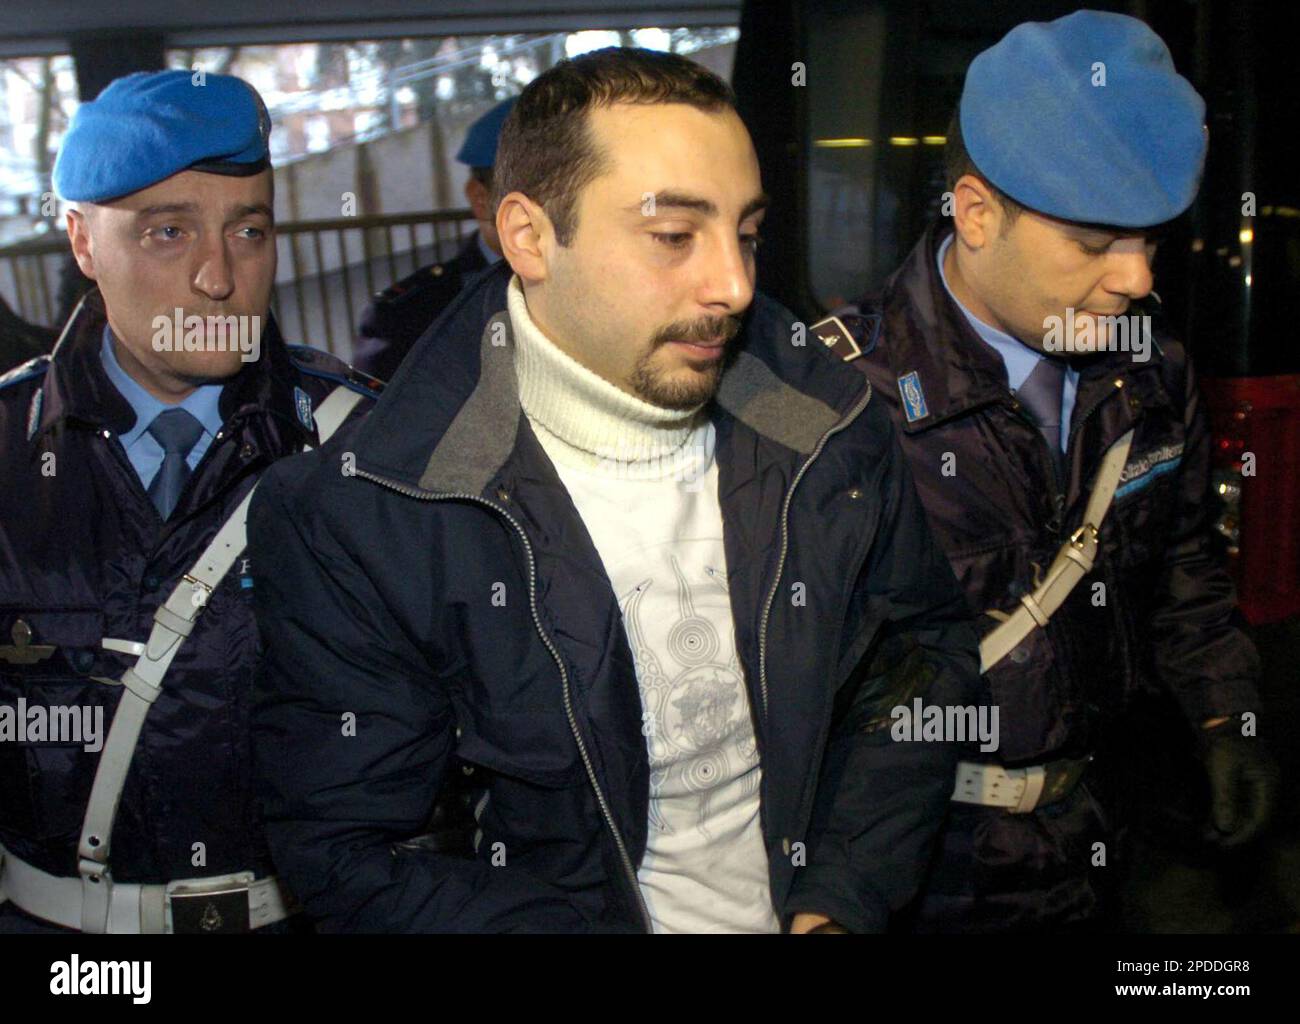 Nicola Sapone is escorted by penitentiary police officers as he enters the  Busto Arsizio court, near Varese, northern Italy, Tuesday, Jan. 31, 2006  for a hearing of the so-called "Bestie di Satana" (